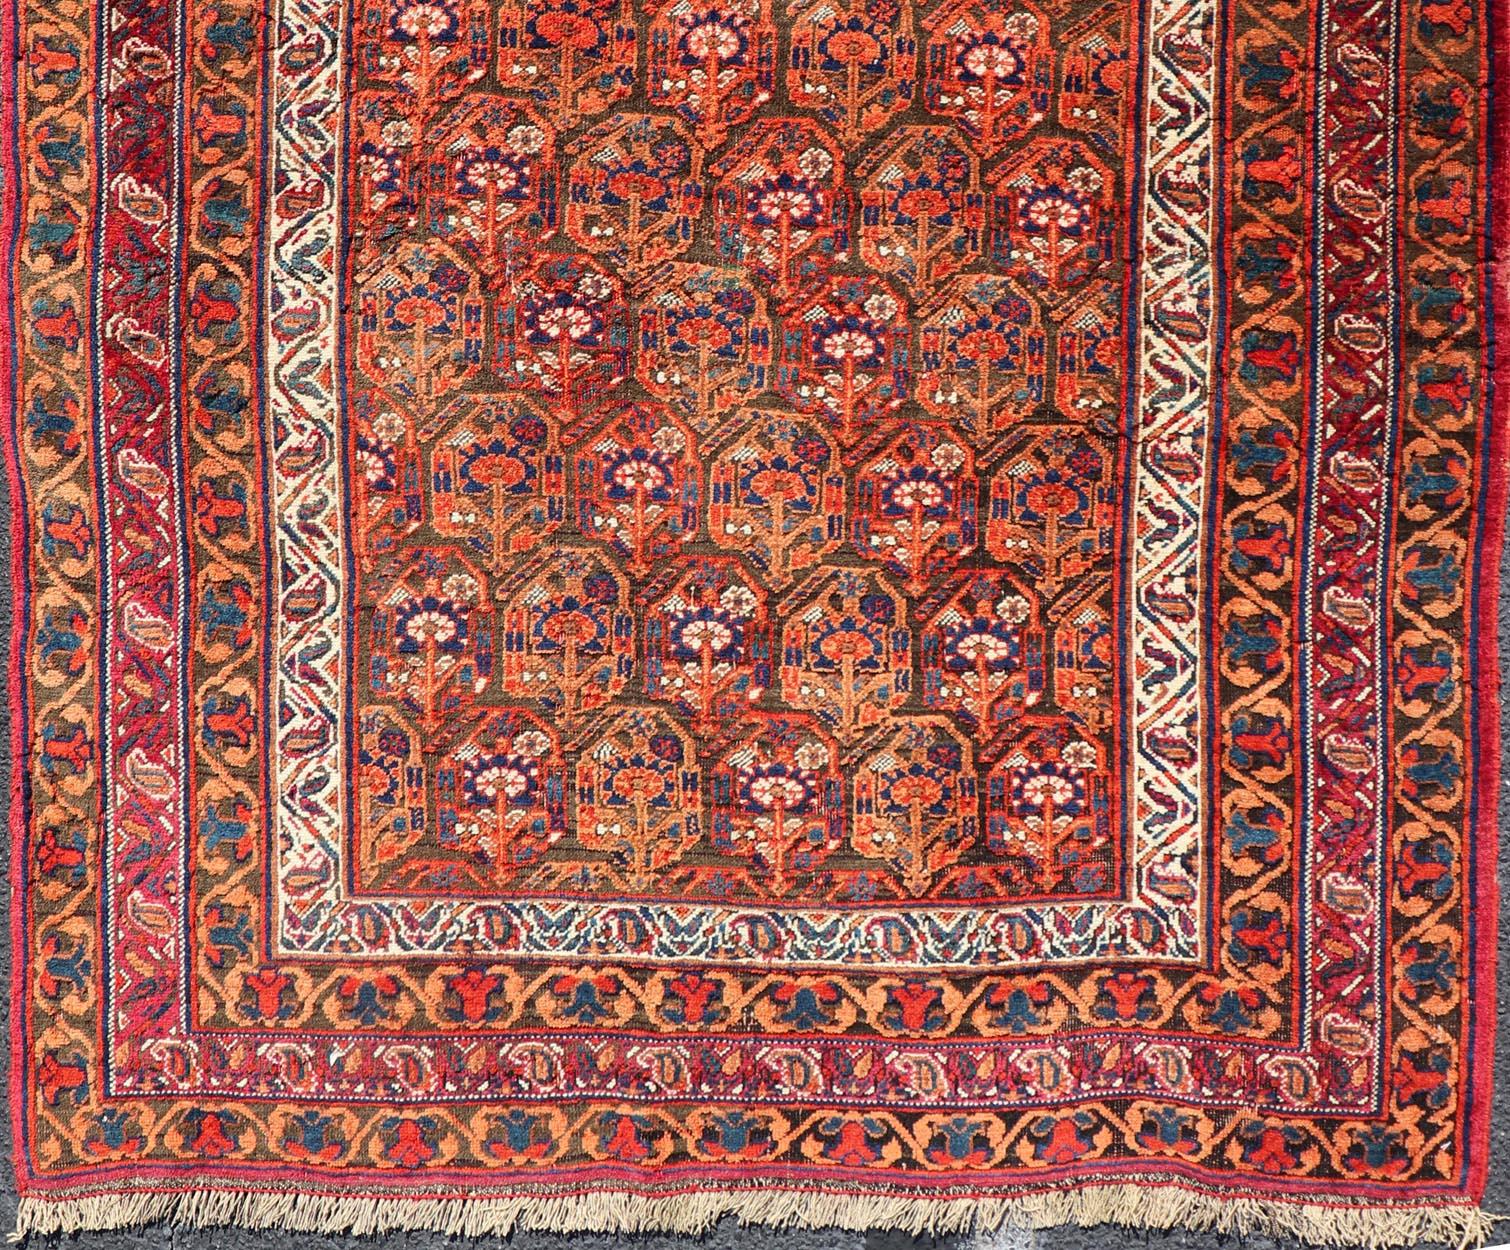  Fine Persian Antique Afshar Rug in Orange and Copper Background & Multi Colors For Sale 2